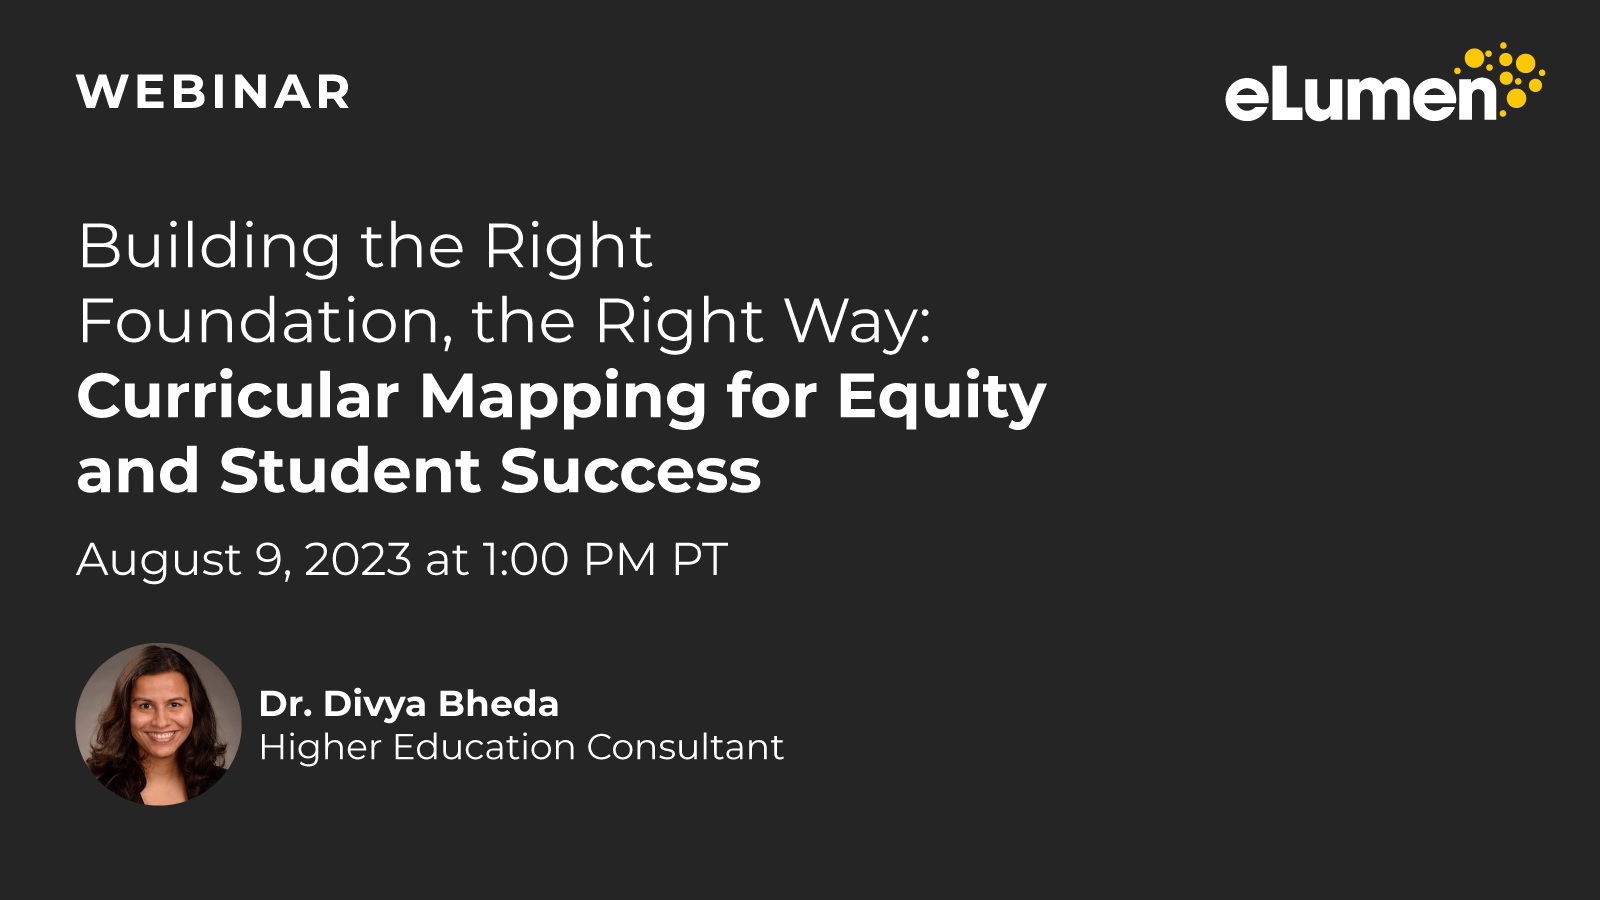 Building the Right Foundation, the Right Way: Curricular Mapping for Equity and Student Success